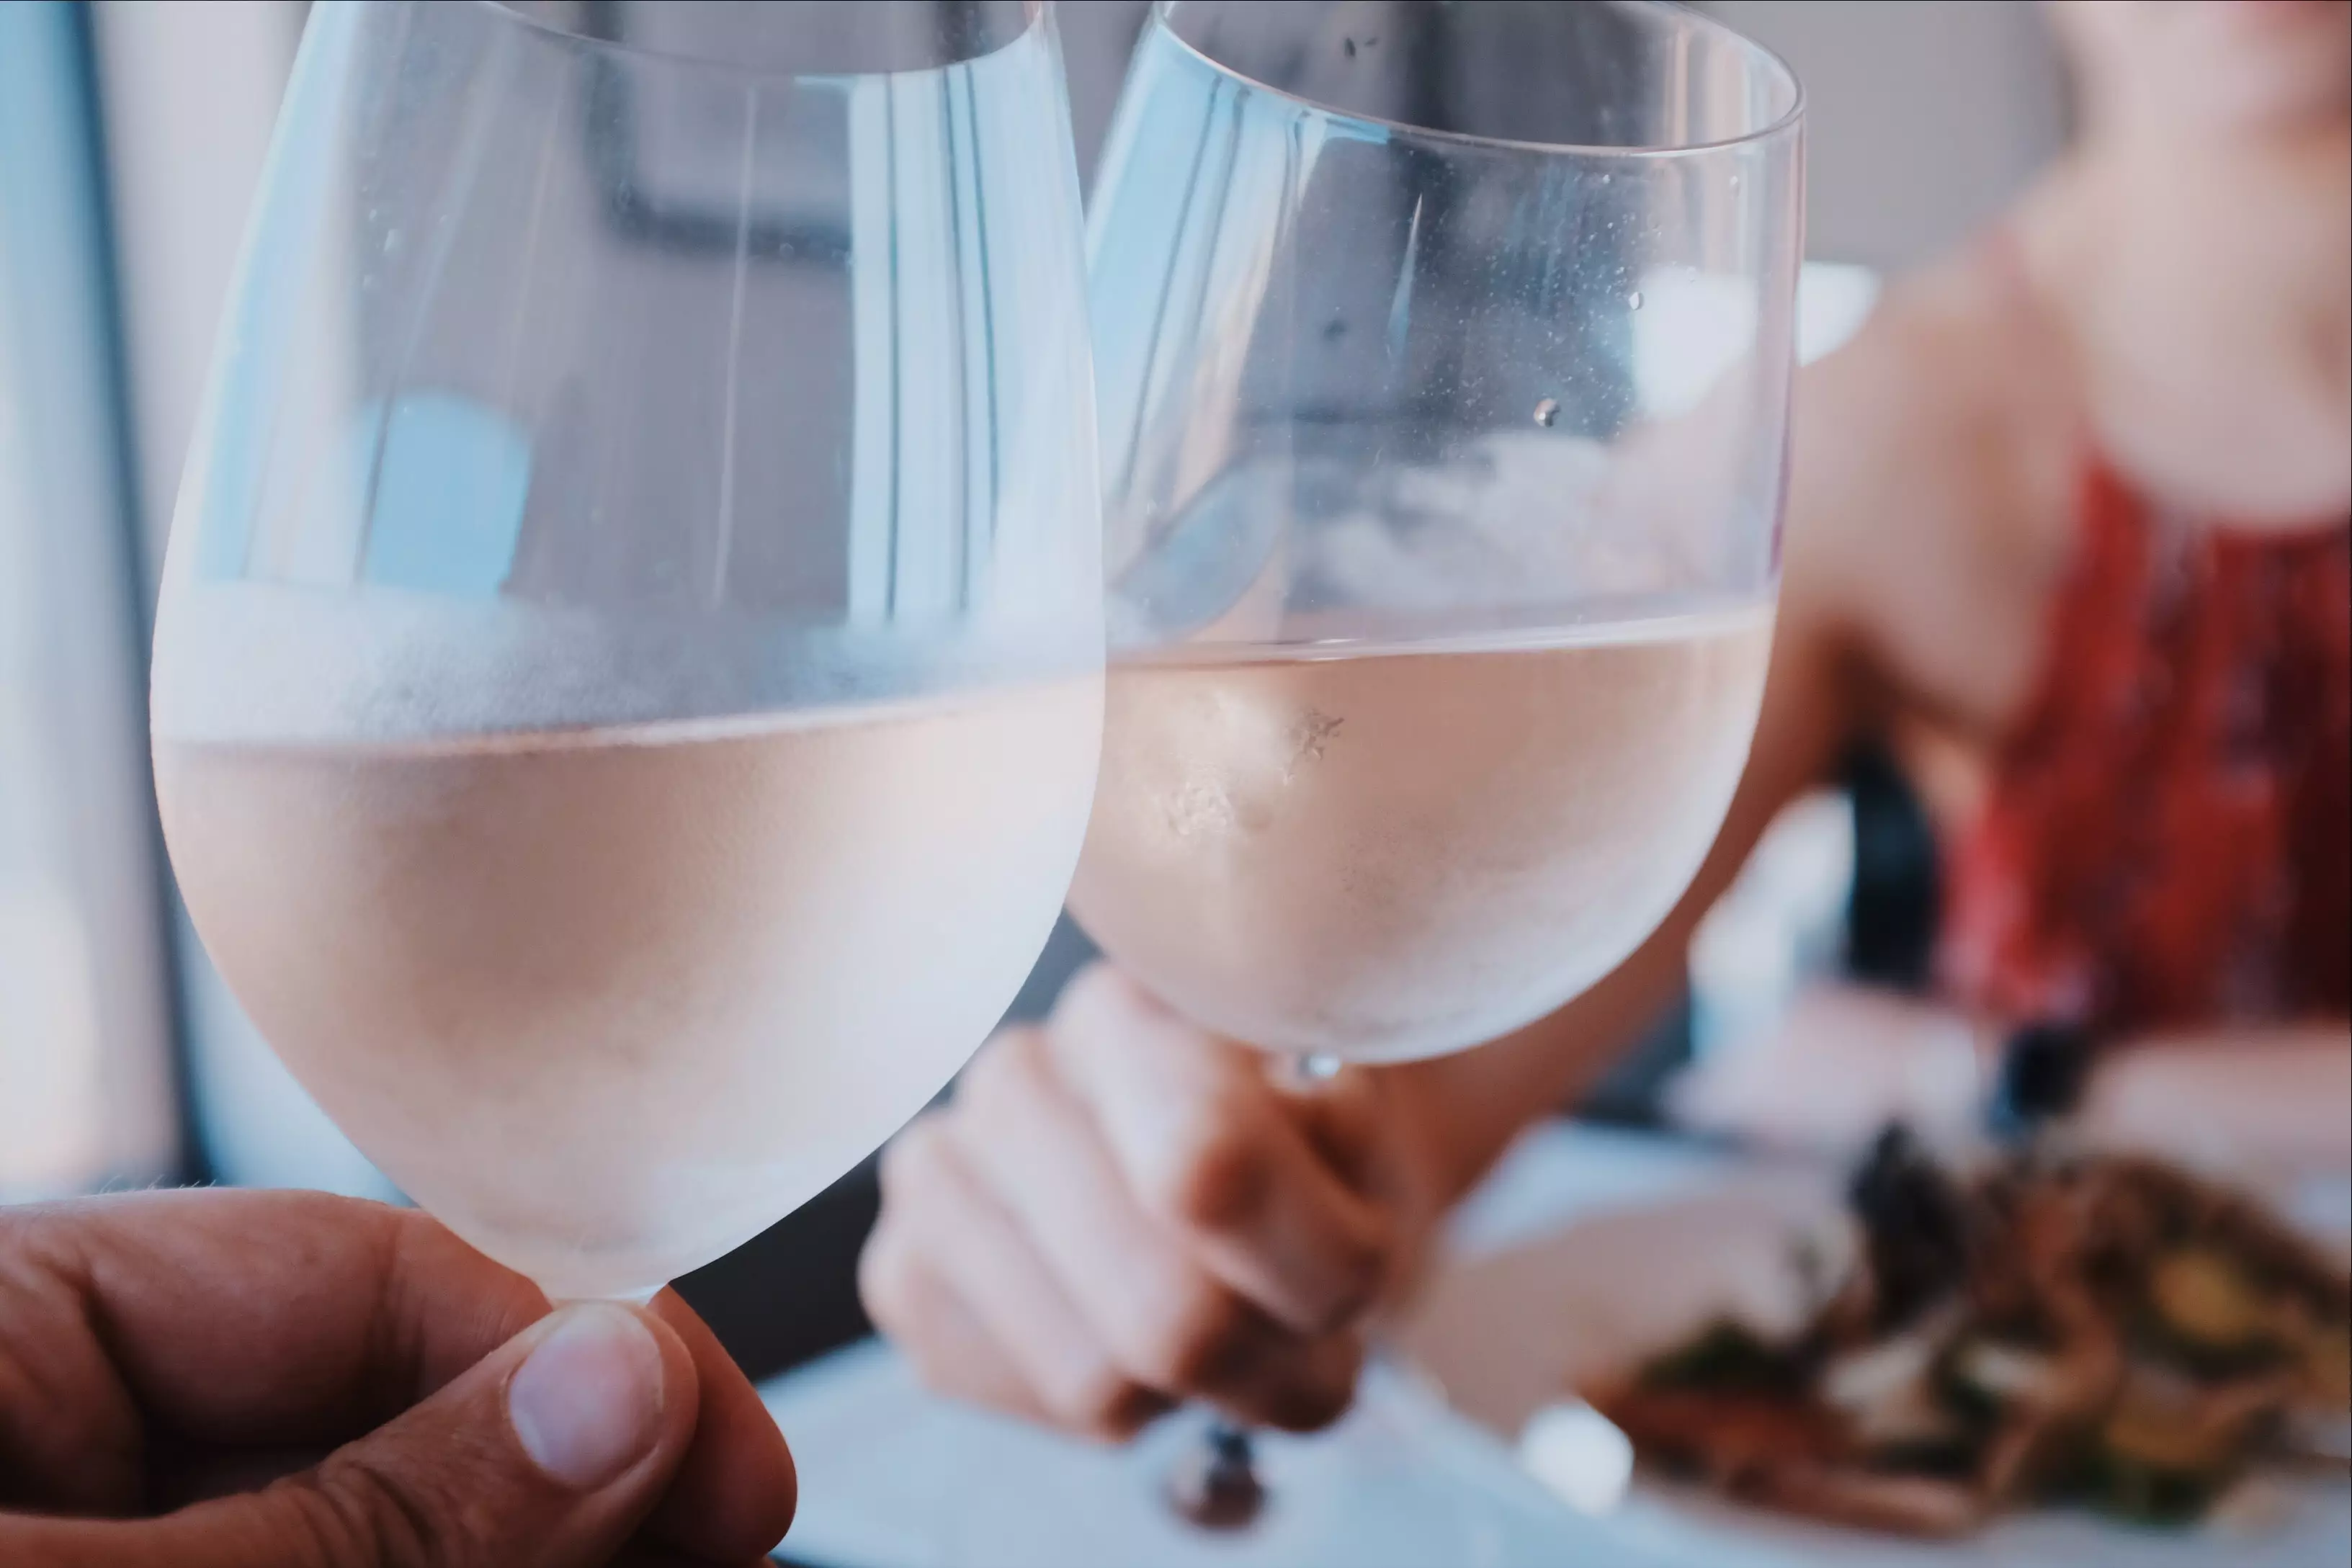 A number of different rosé wines will be available to try (